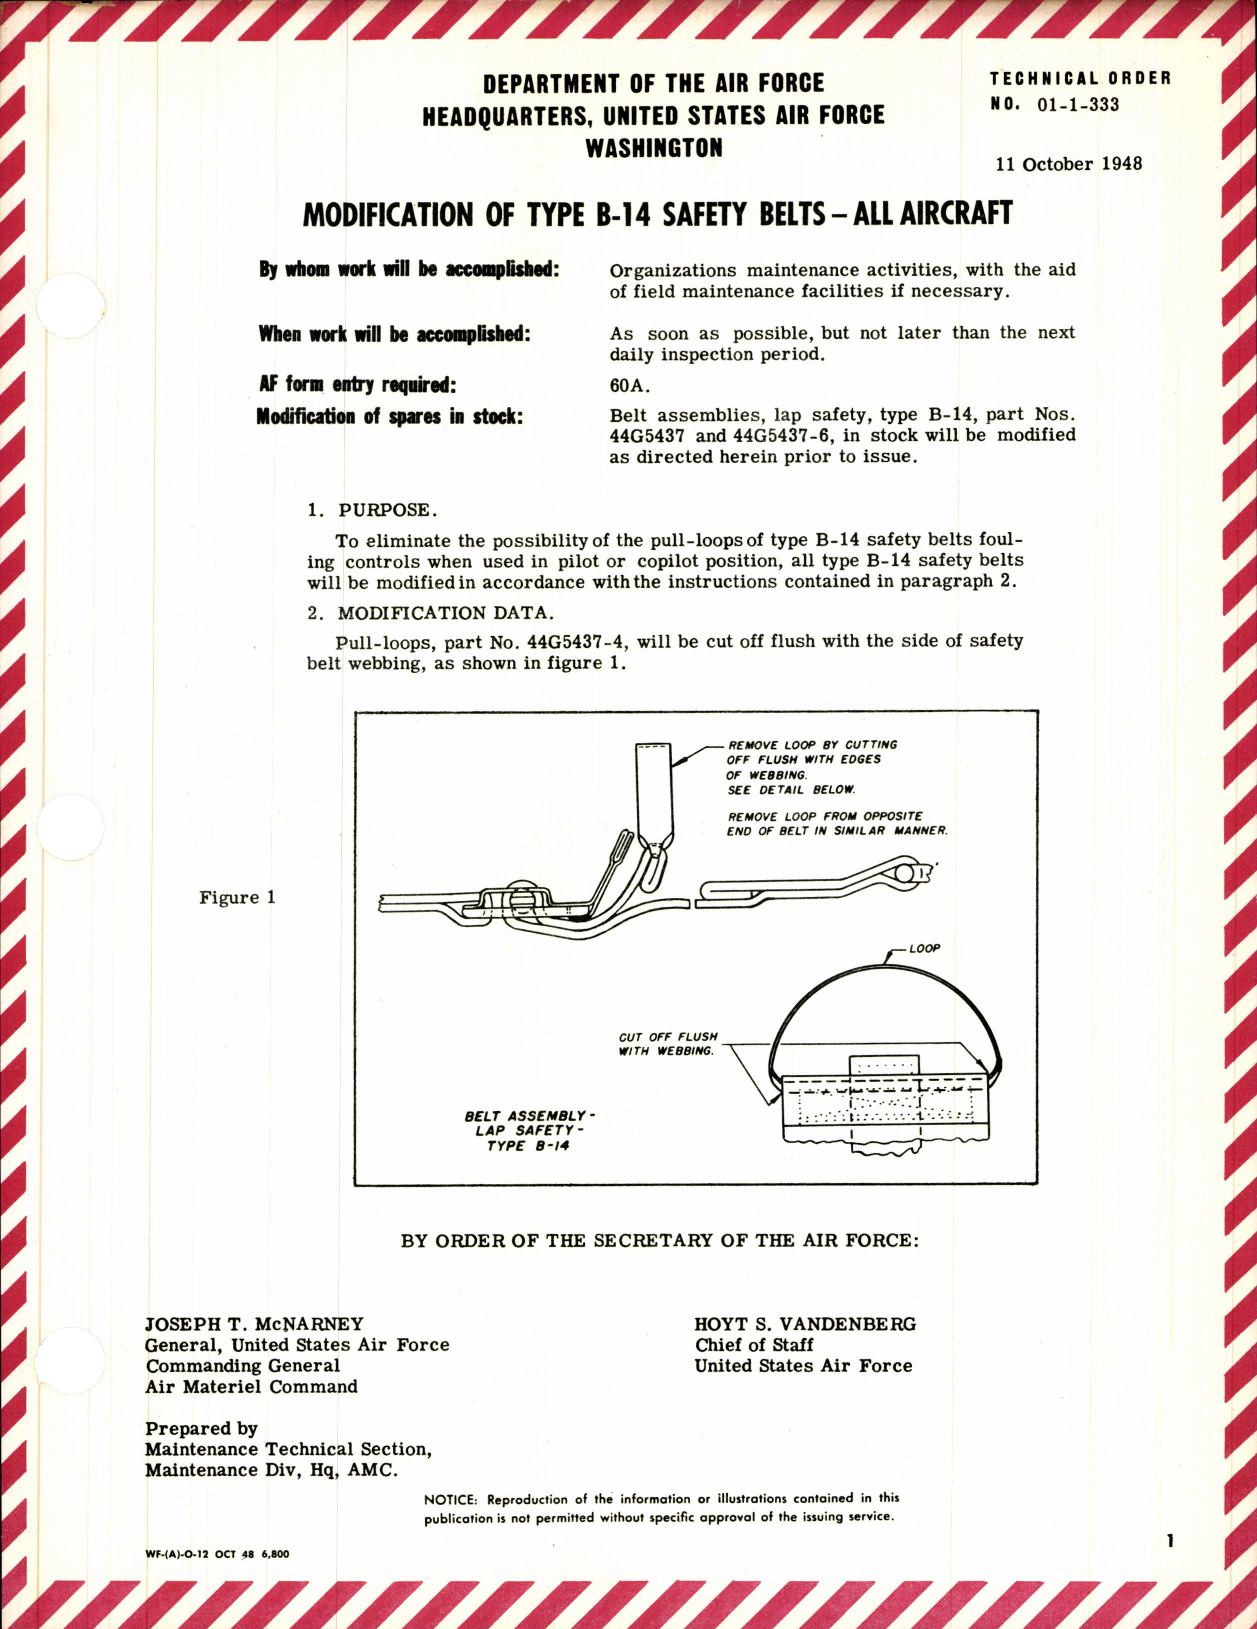 Sample page 1 from AirCorps Library document: Modification of Type B-14 Safety Belts for All Aircraft